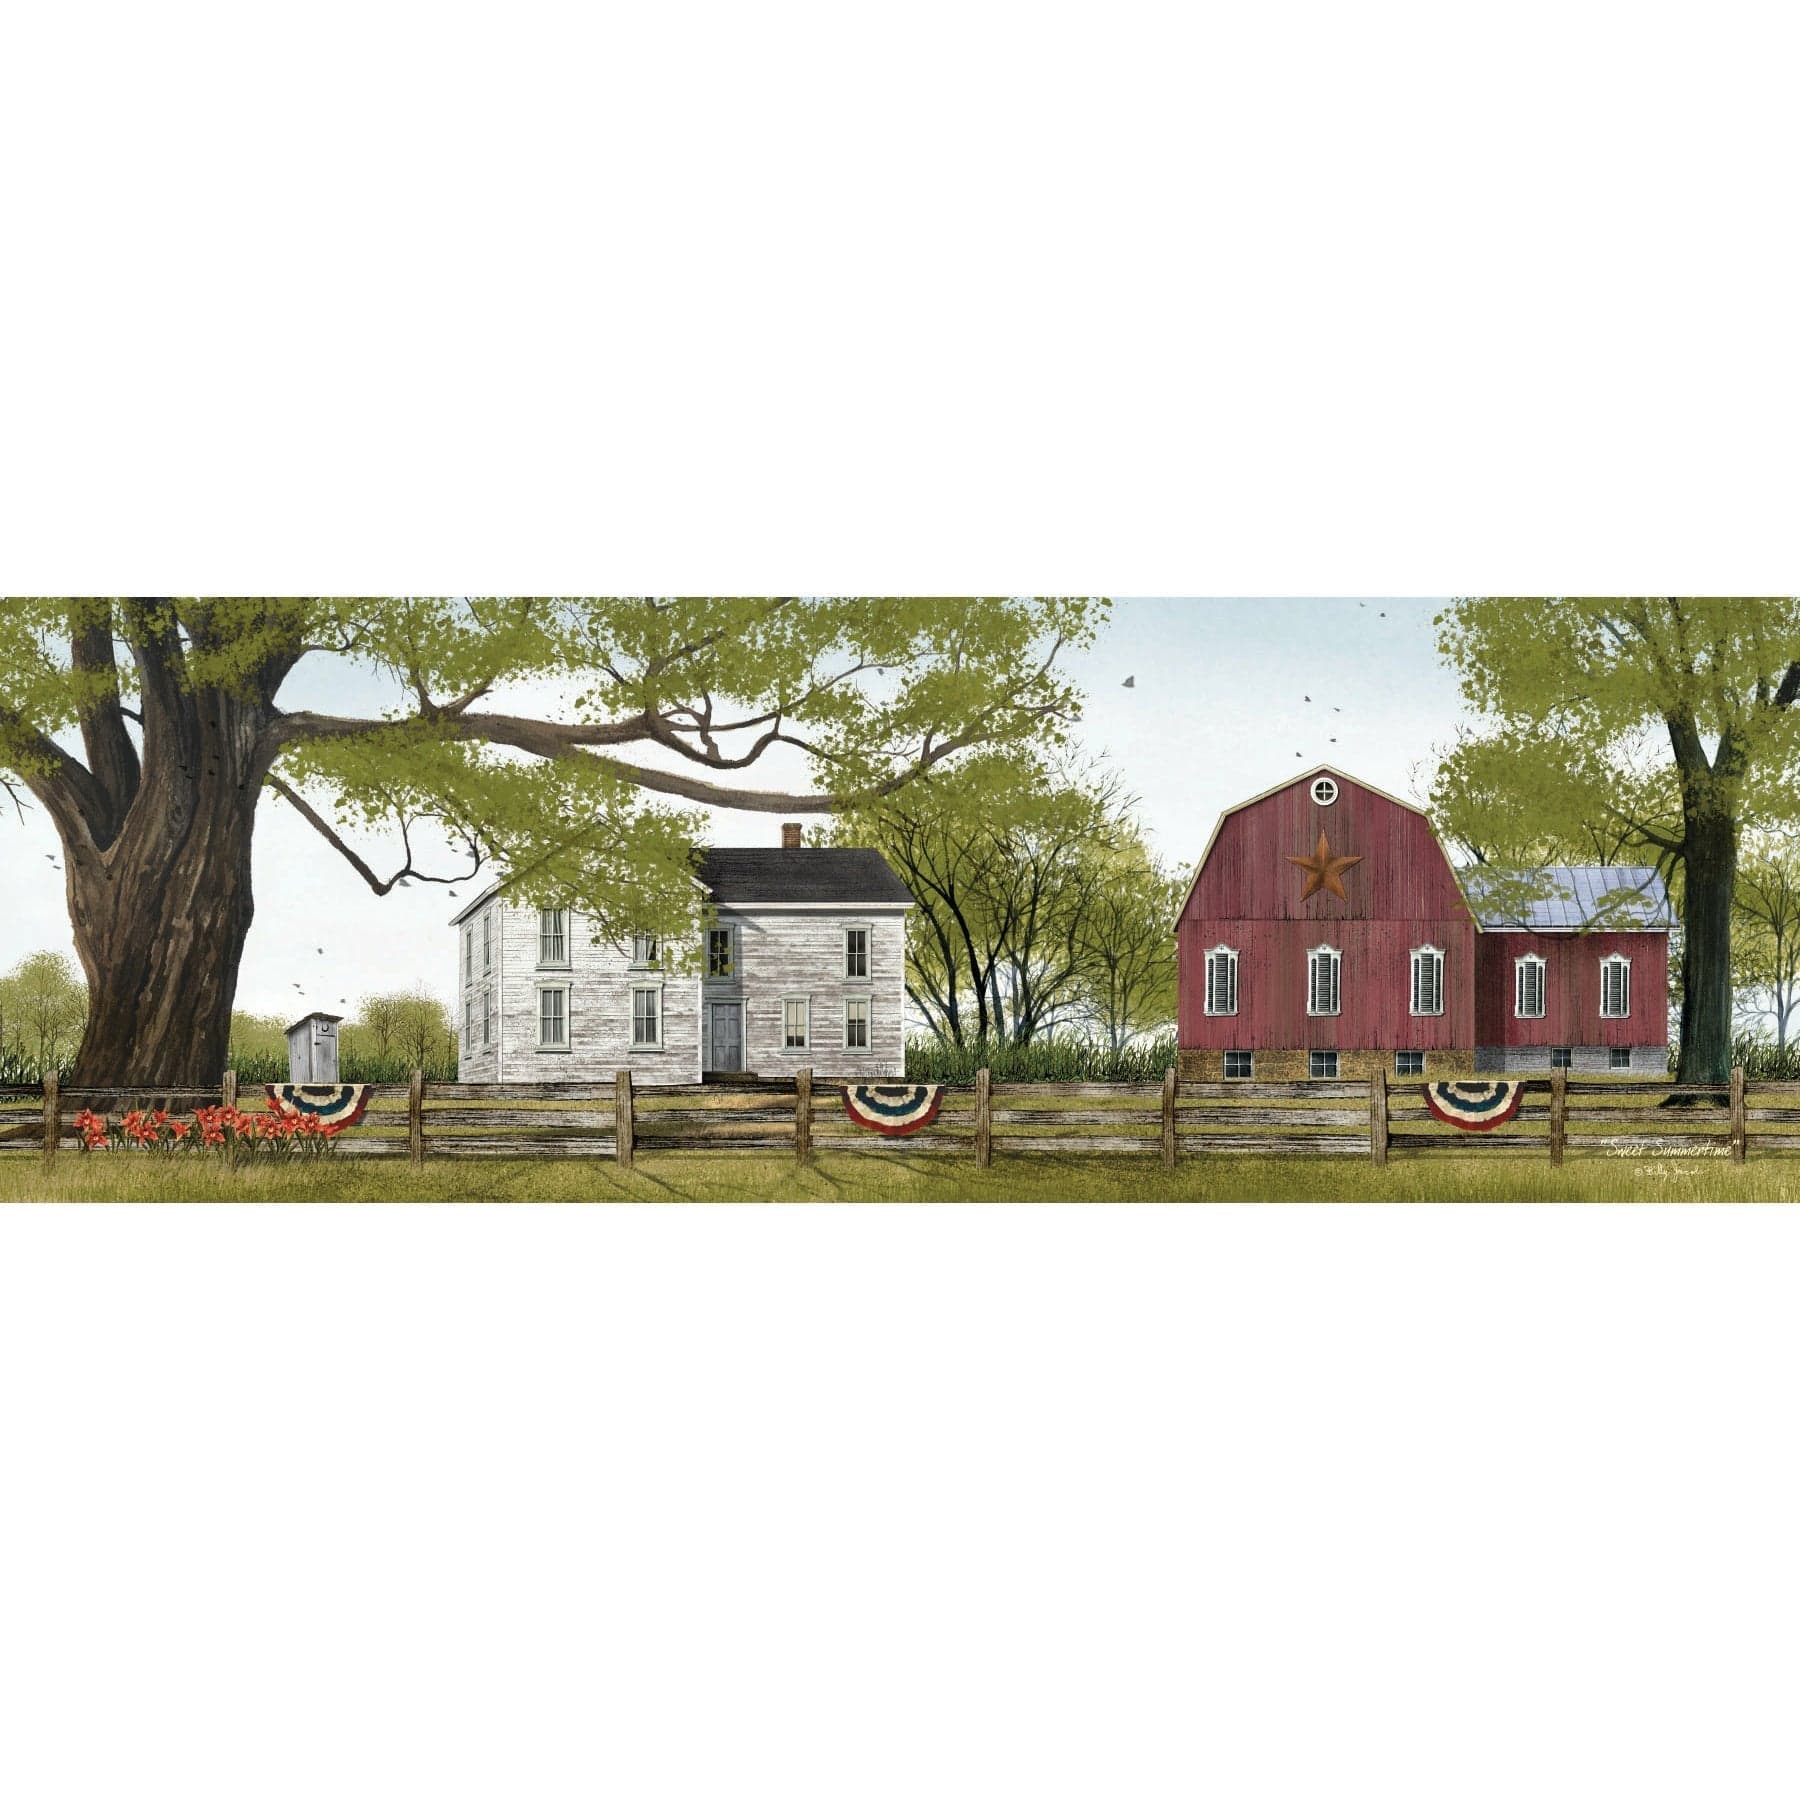 Sweet Summertime By Billy Jacobs Art Print - 8 X 24-Penny Lane Publishing-The Village Merchant